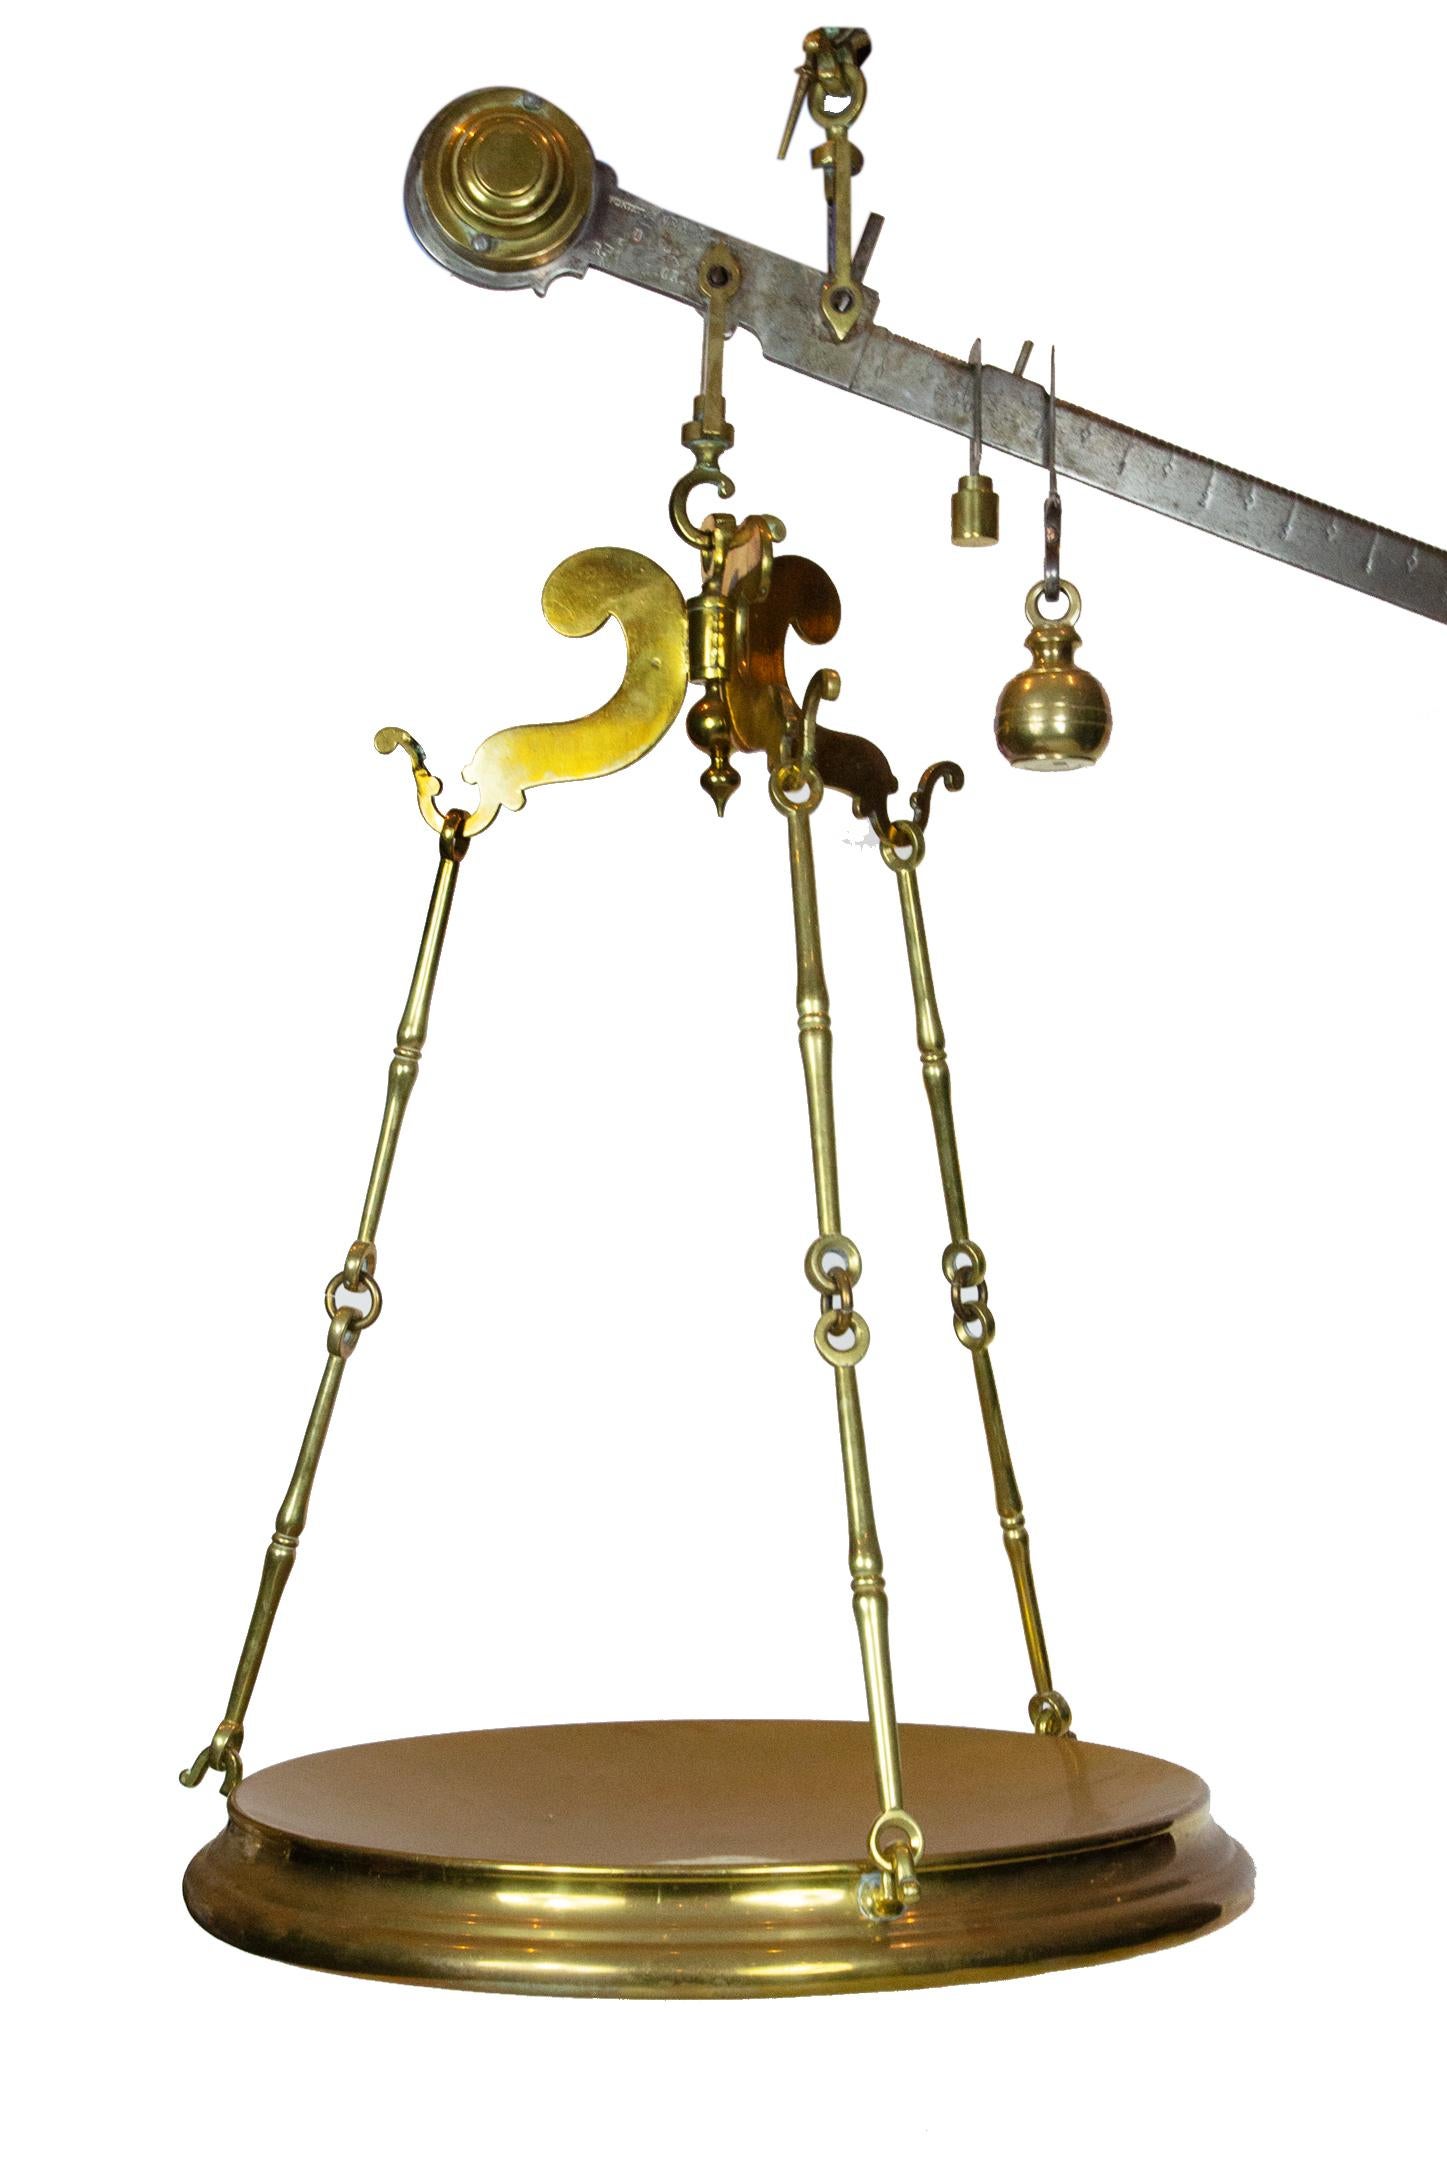 19th century large Italian brass butcher's scale.

An Italian brass hanging butcher's scale from the 19th century. This Italian scale features a horizontal beam with weight sat the end. The upper beam will hang from the ceiling or perhaps an